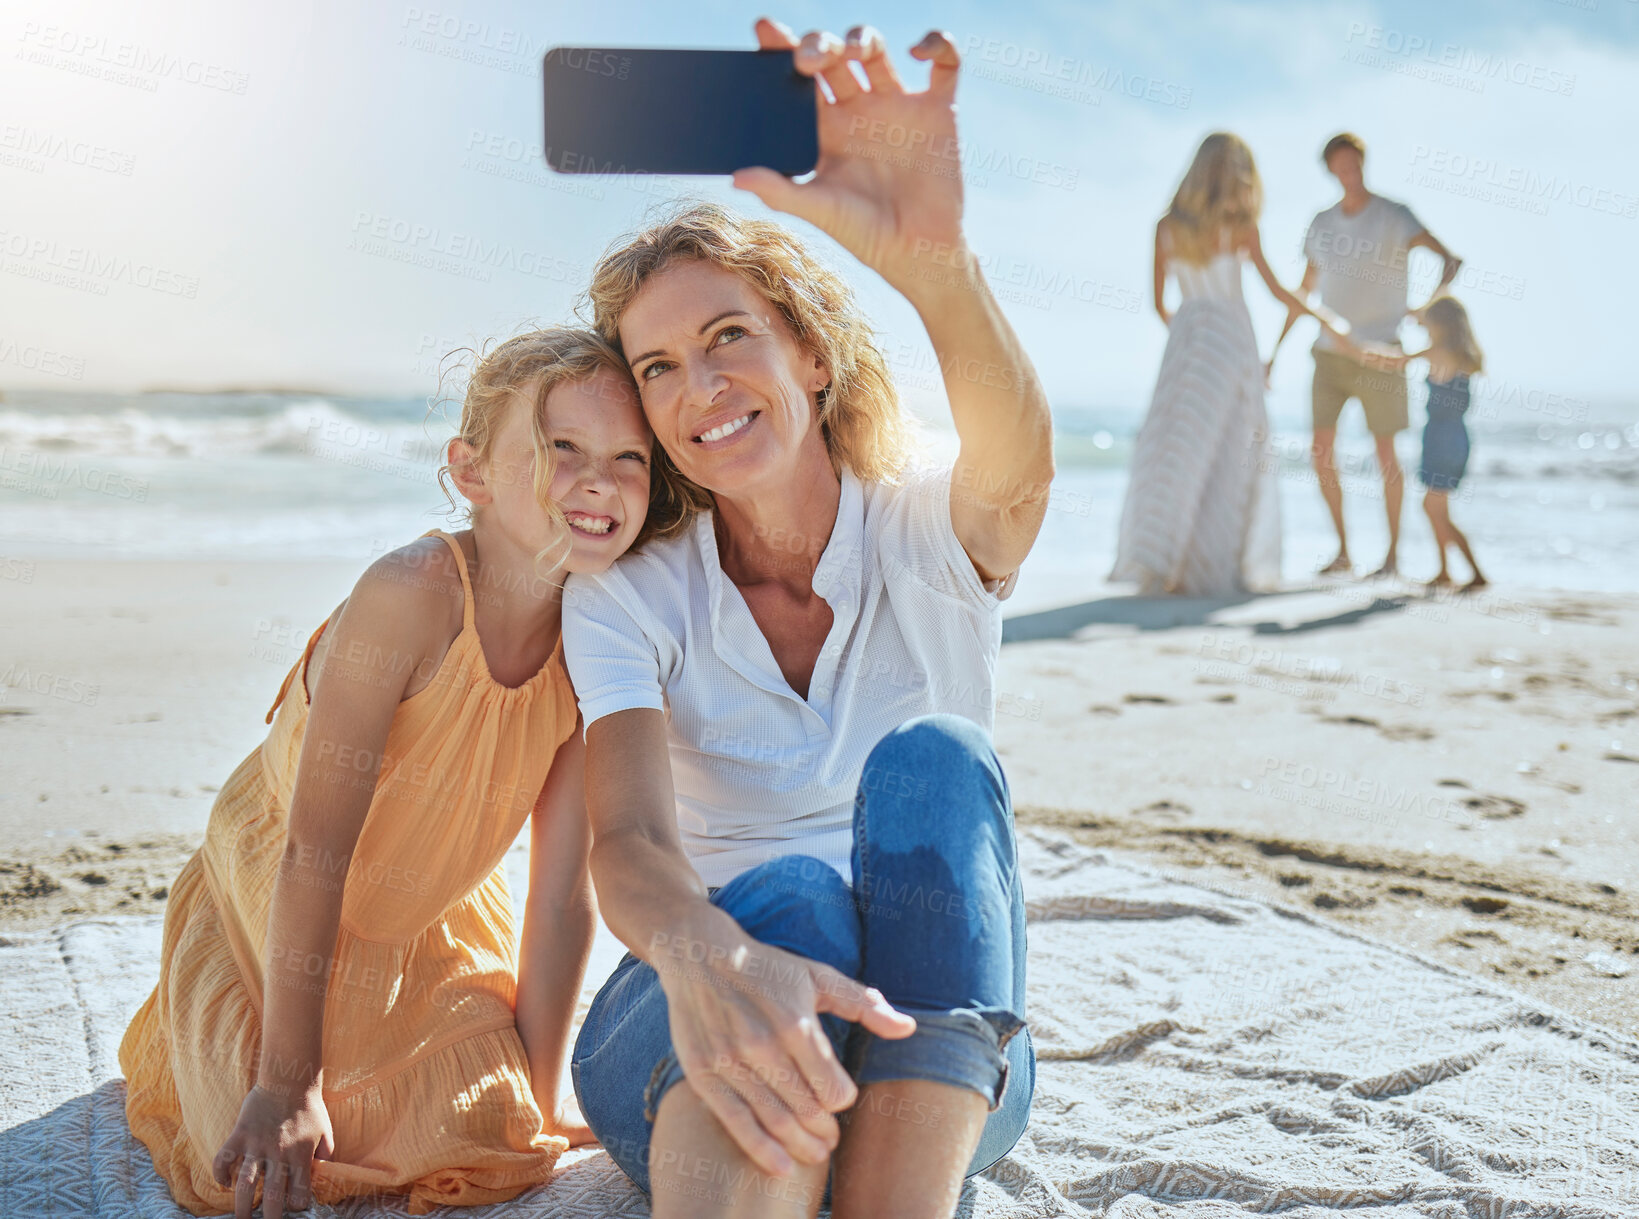 Buy stock photo Cheerful mature woman and little girl taking a selfie while sitting on the beach. Happy little girl smiling while sitting with her mom or grandmother taking picture on mobile phone while on vacation